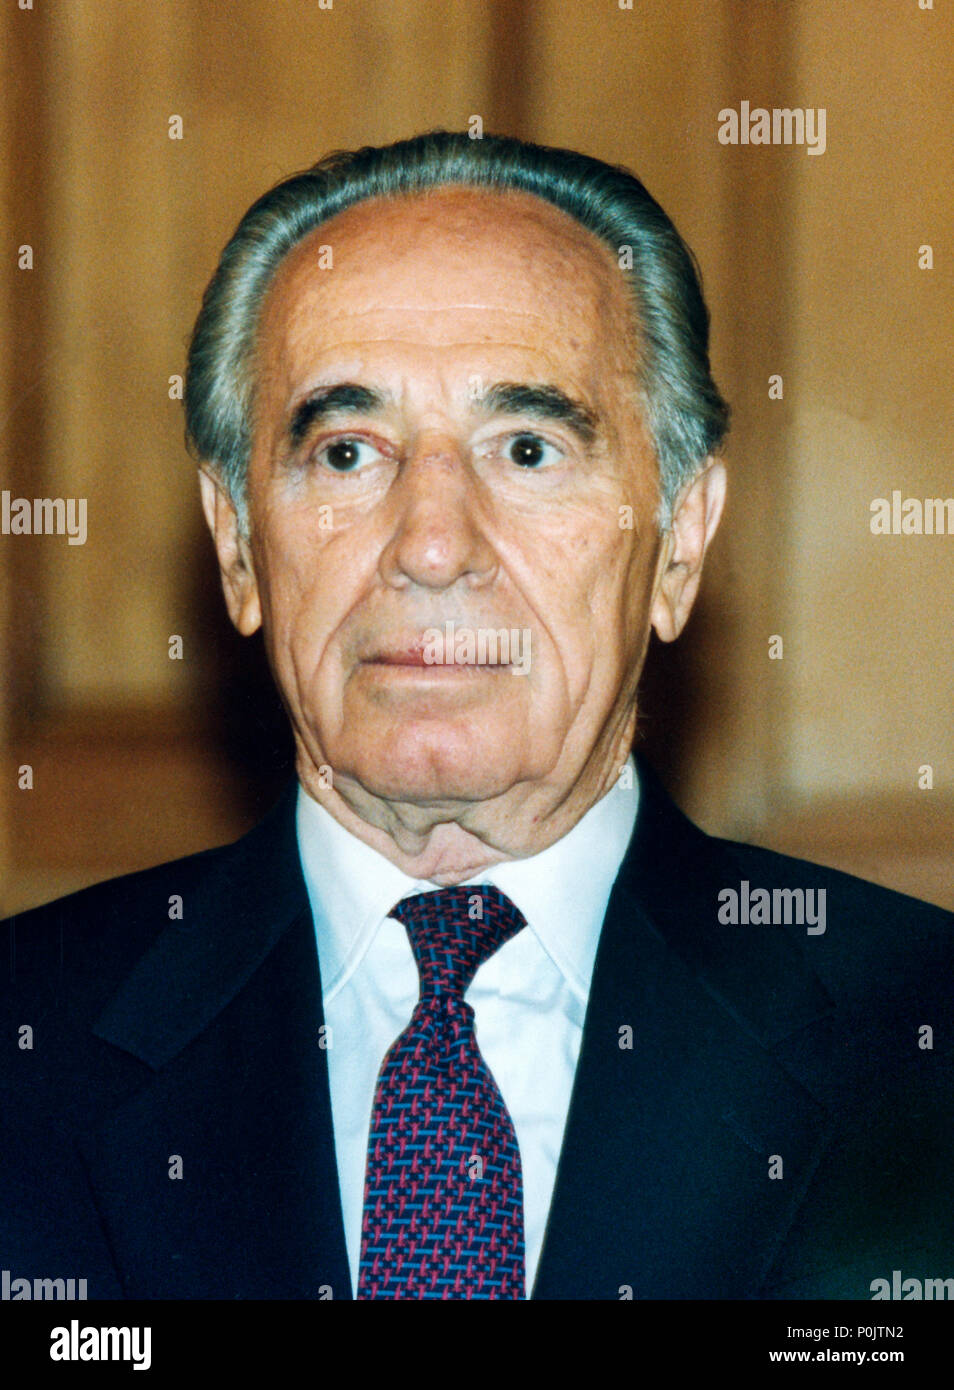 SHIMON PERES Israeli politician 2000 and President for Israel and Nobel Peace Prize laureate Stock Photo